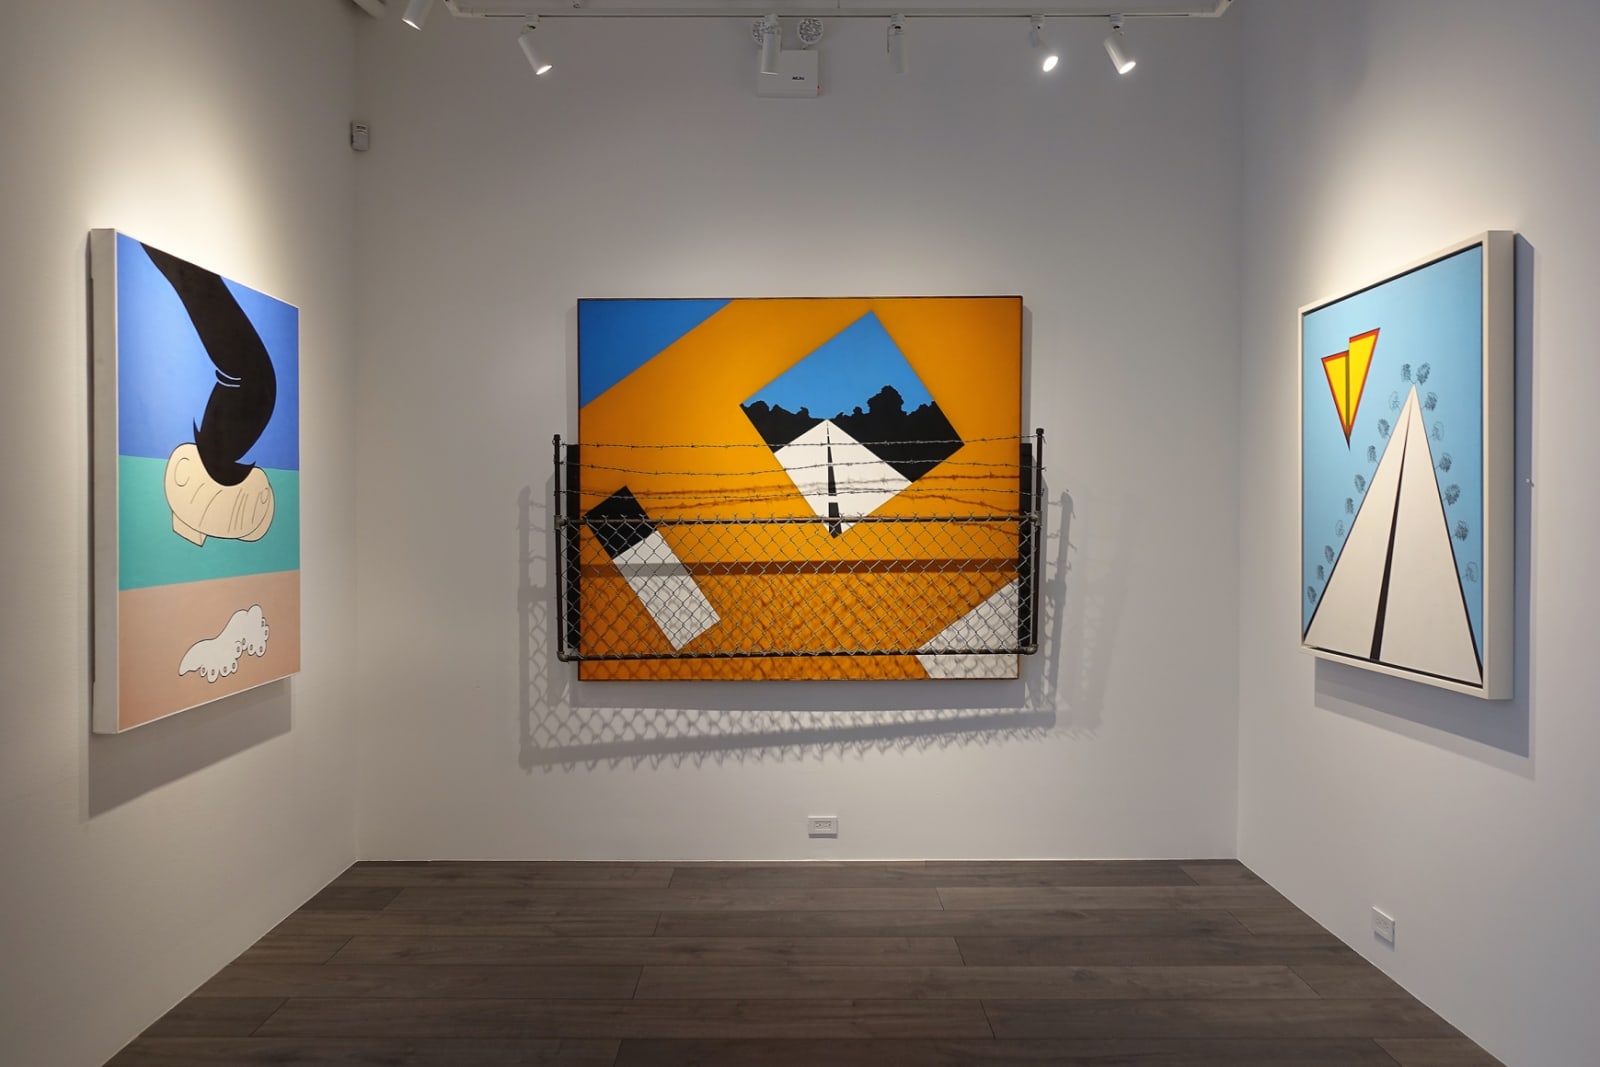 Installation view: New Space, New Acquisitions